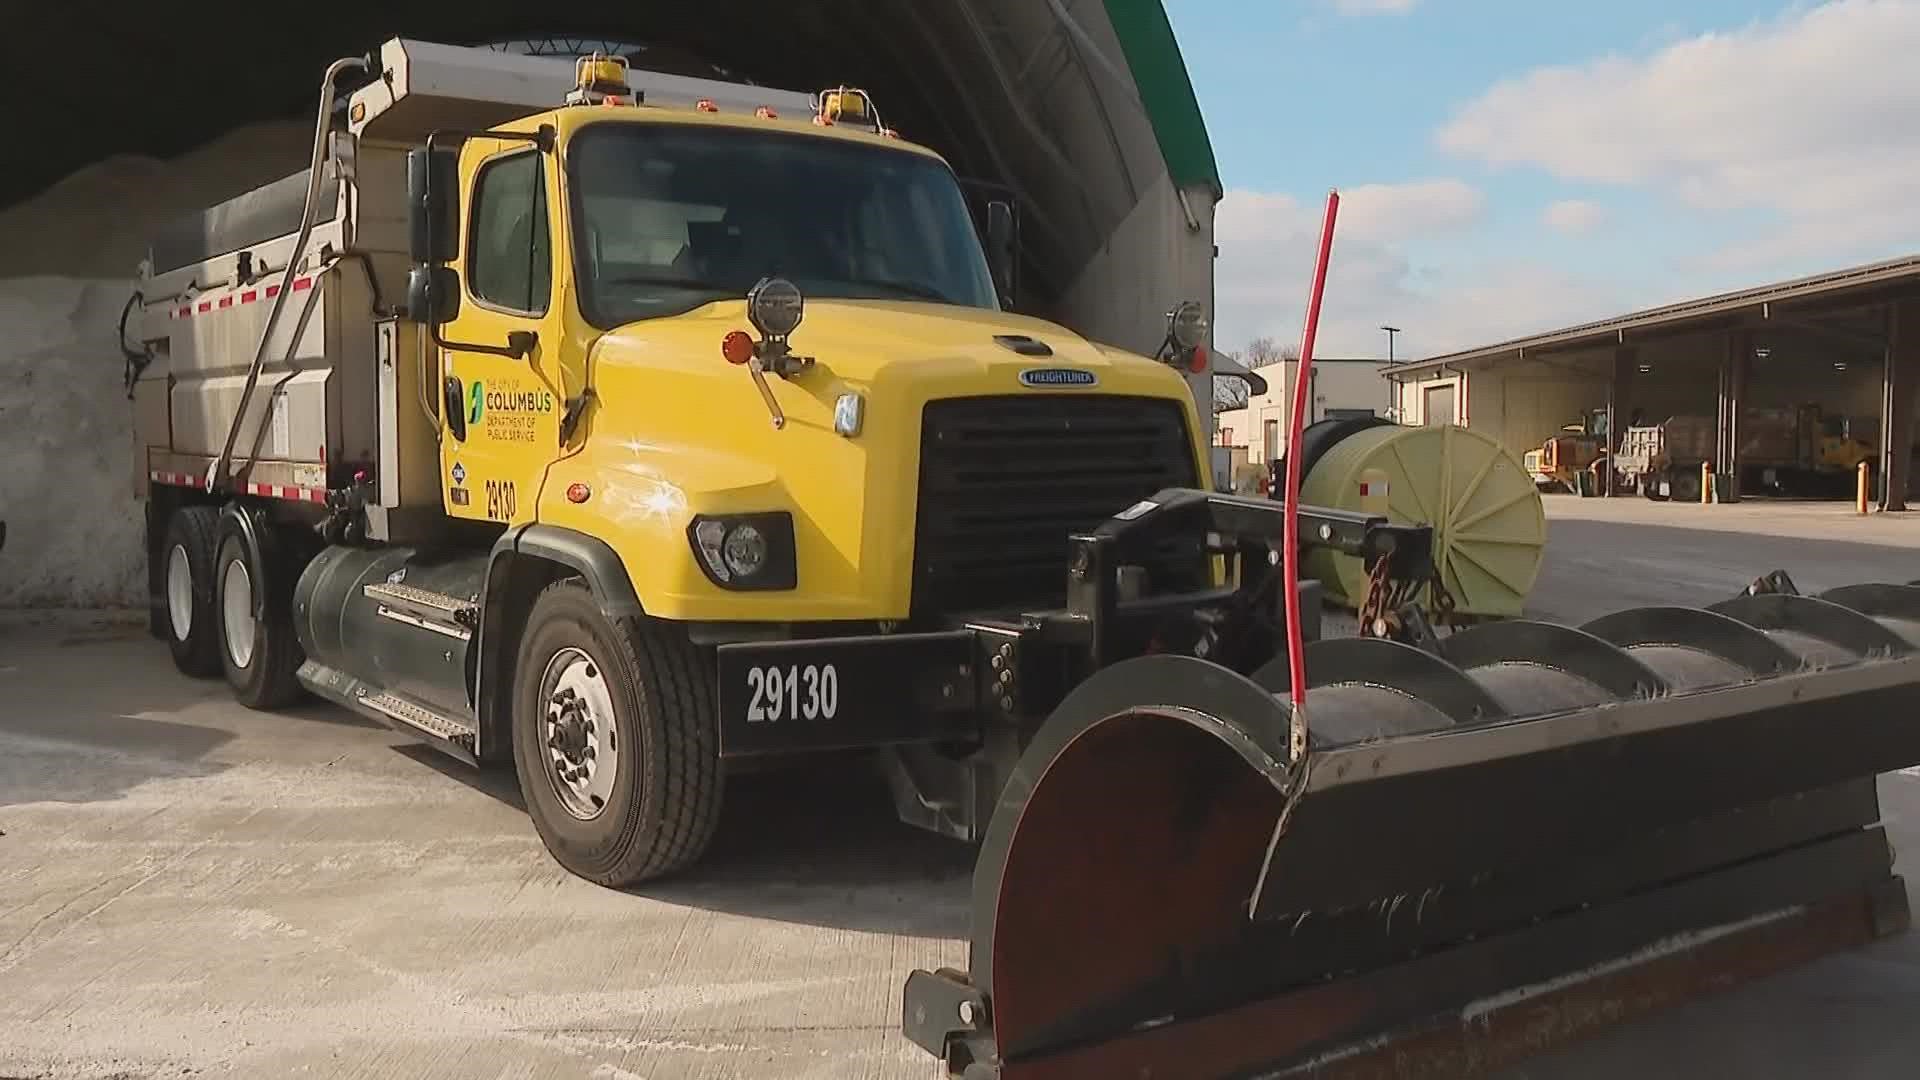 ODOT says it needs 300 plow drivers for the central Ohio region but it’s short 30 drivers this year.